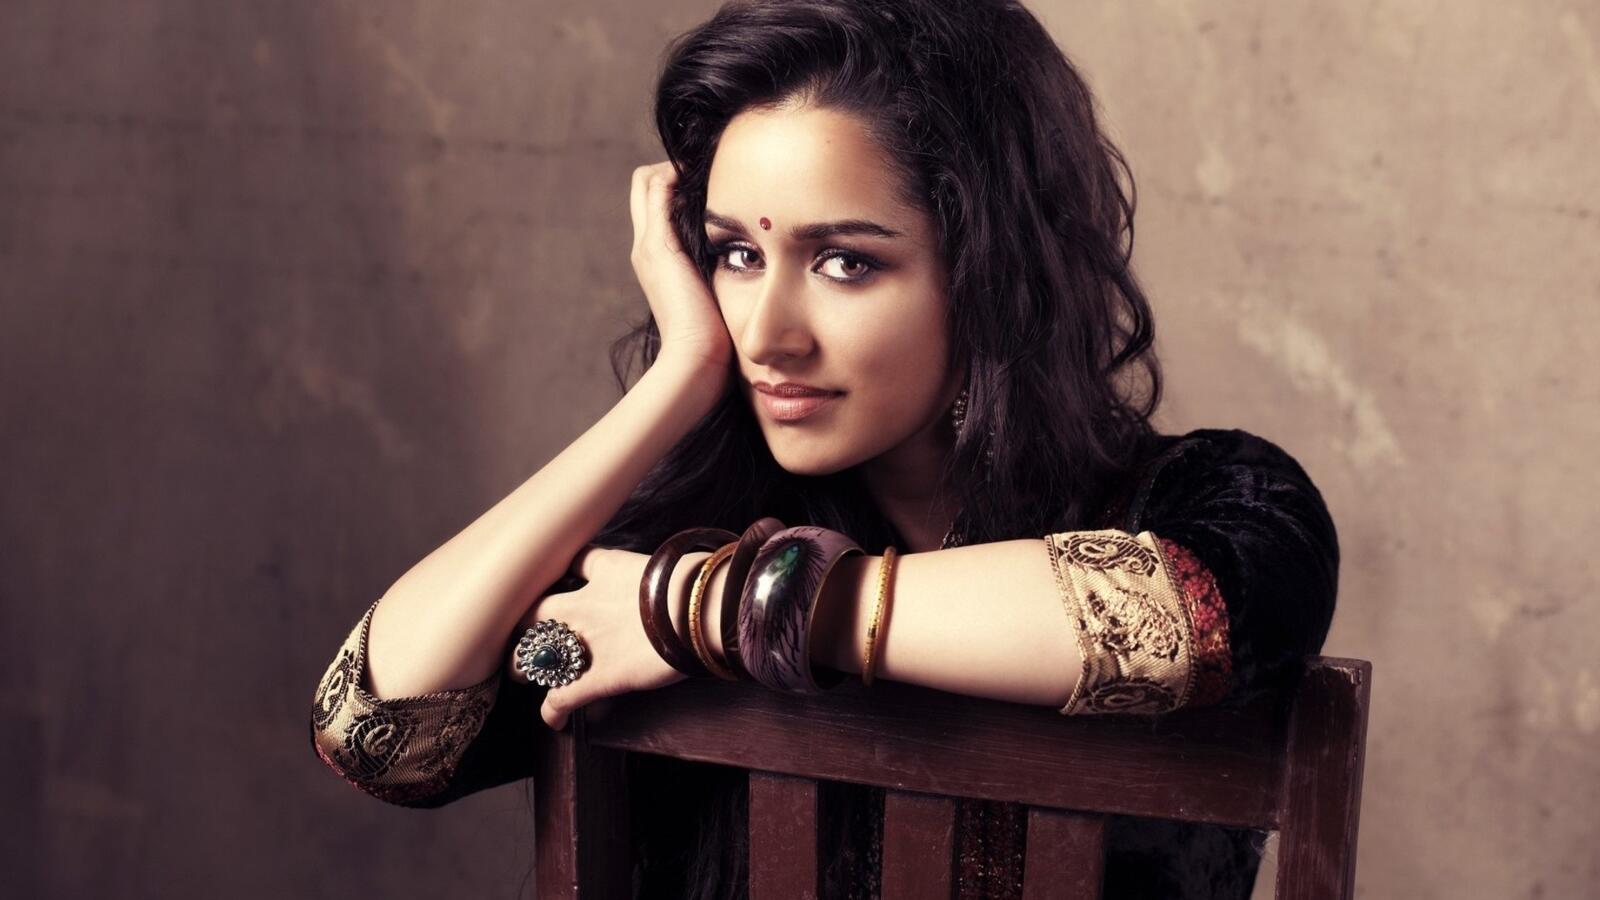 Free photo Shraddha Kapoor sits on a chair